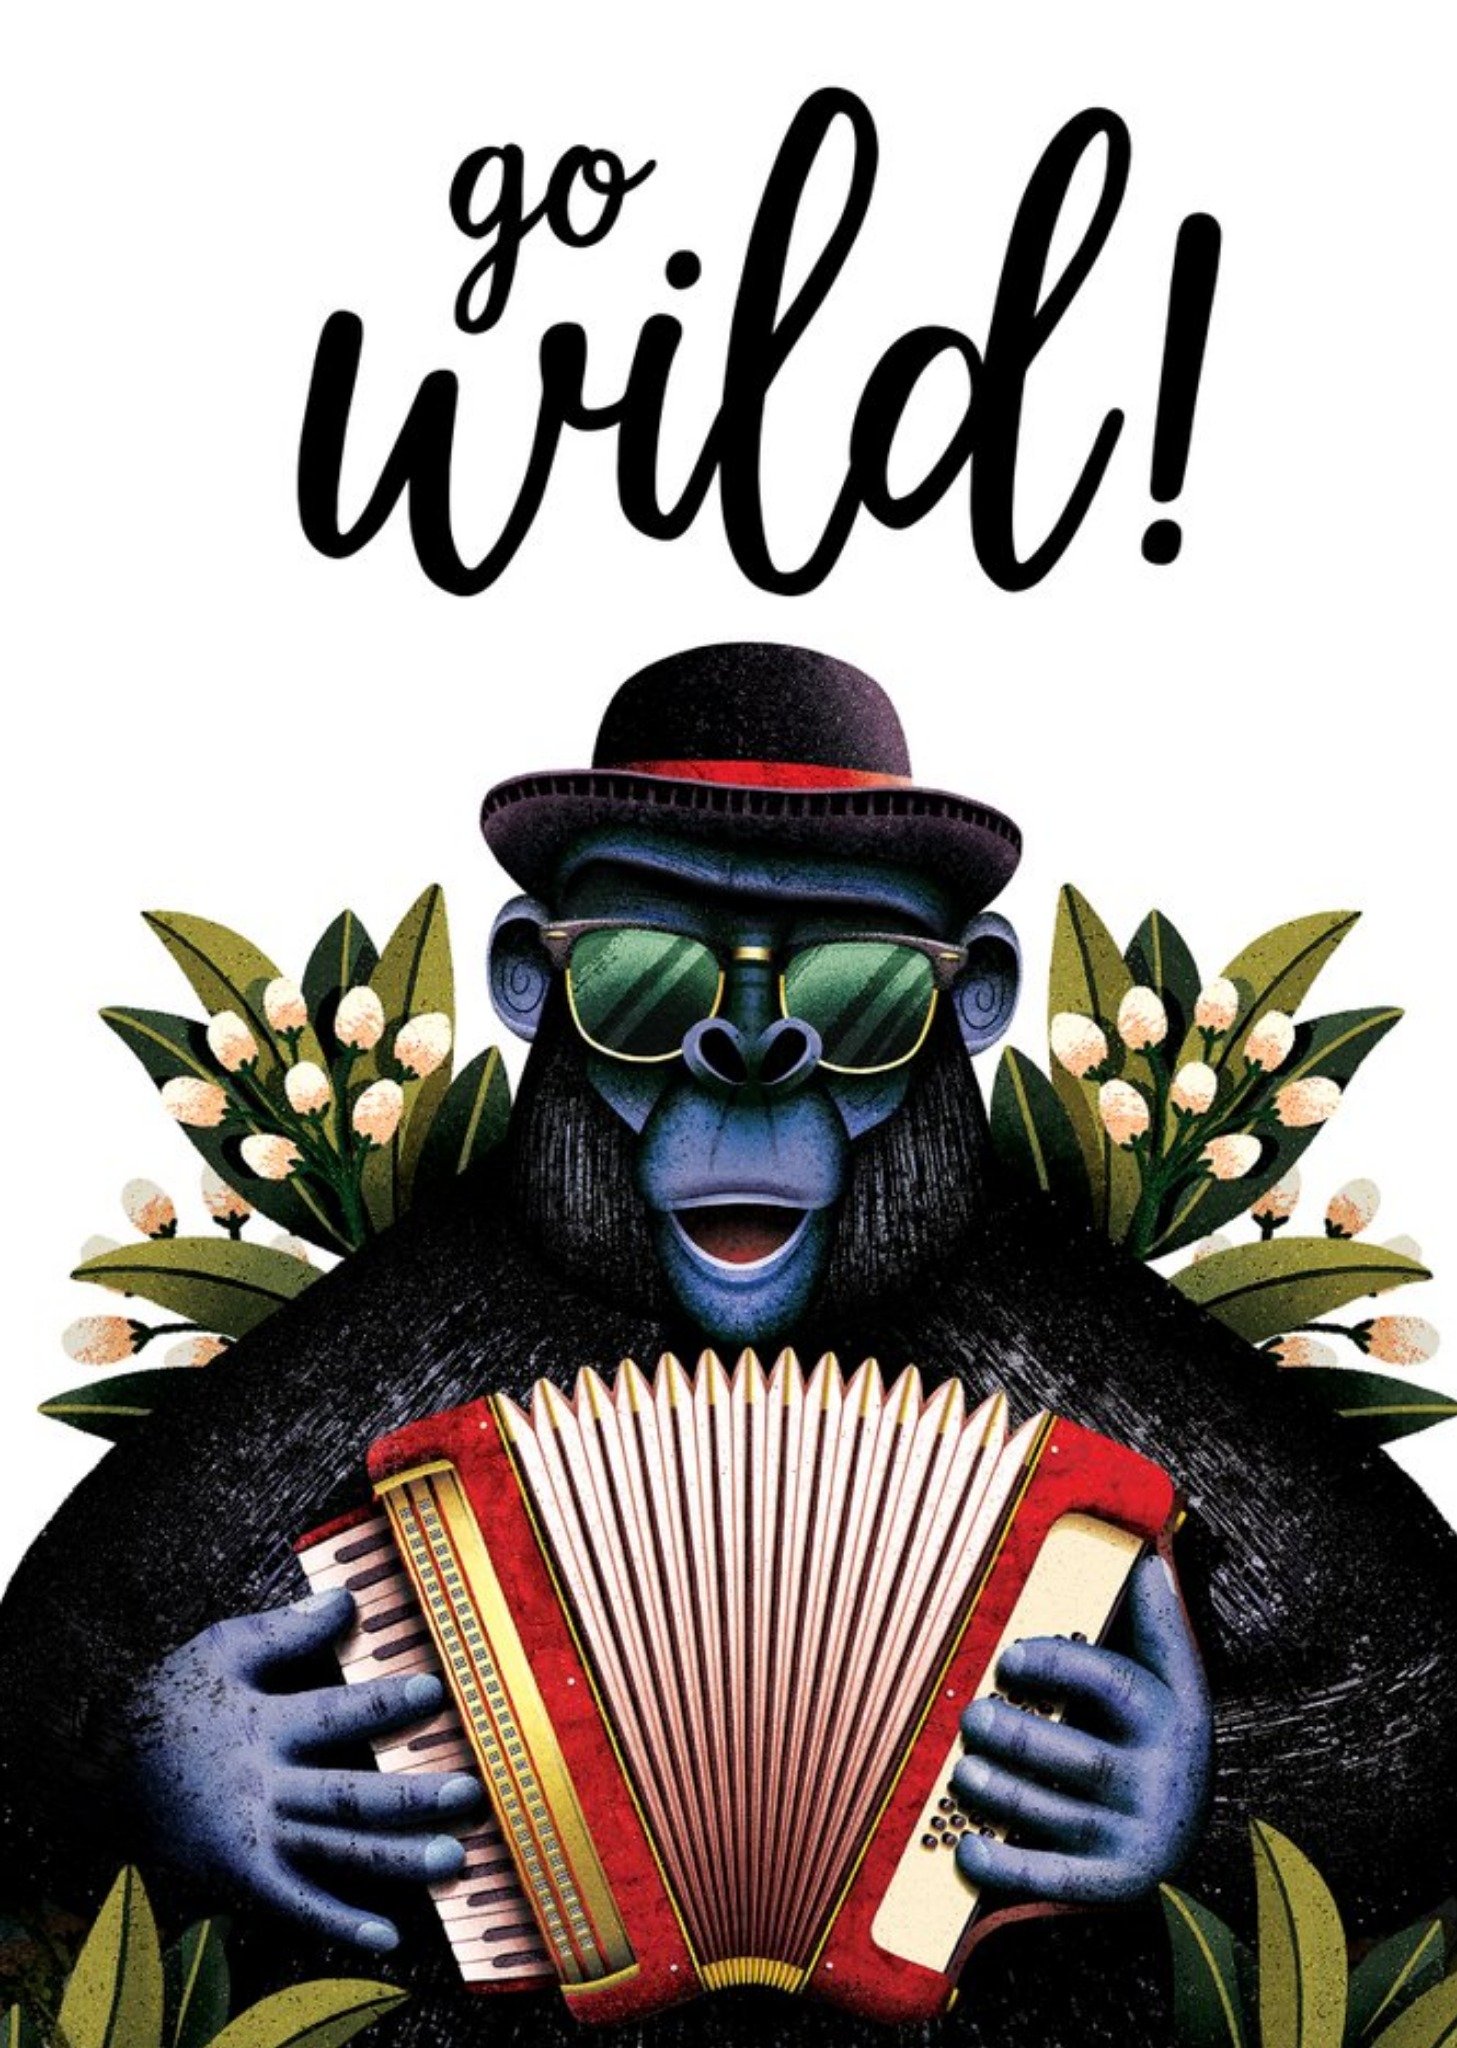 Moonpig Folio Illustration Of A Cool Ape Wearing Sunglasses And A Bowler Hat. Go Wild Birthday Card,